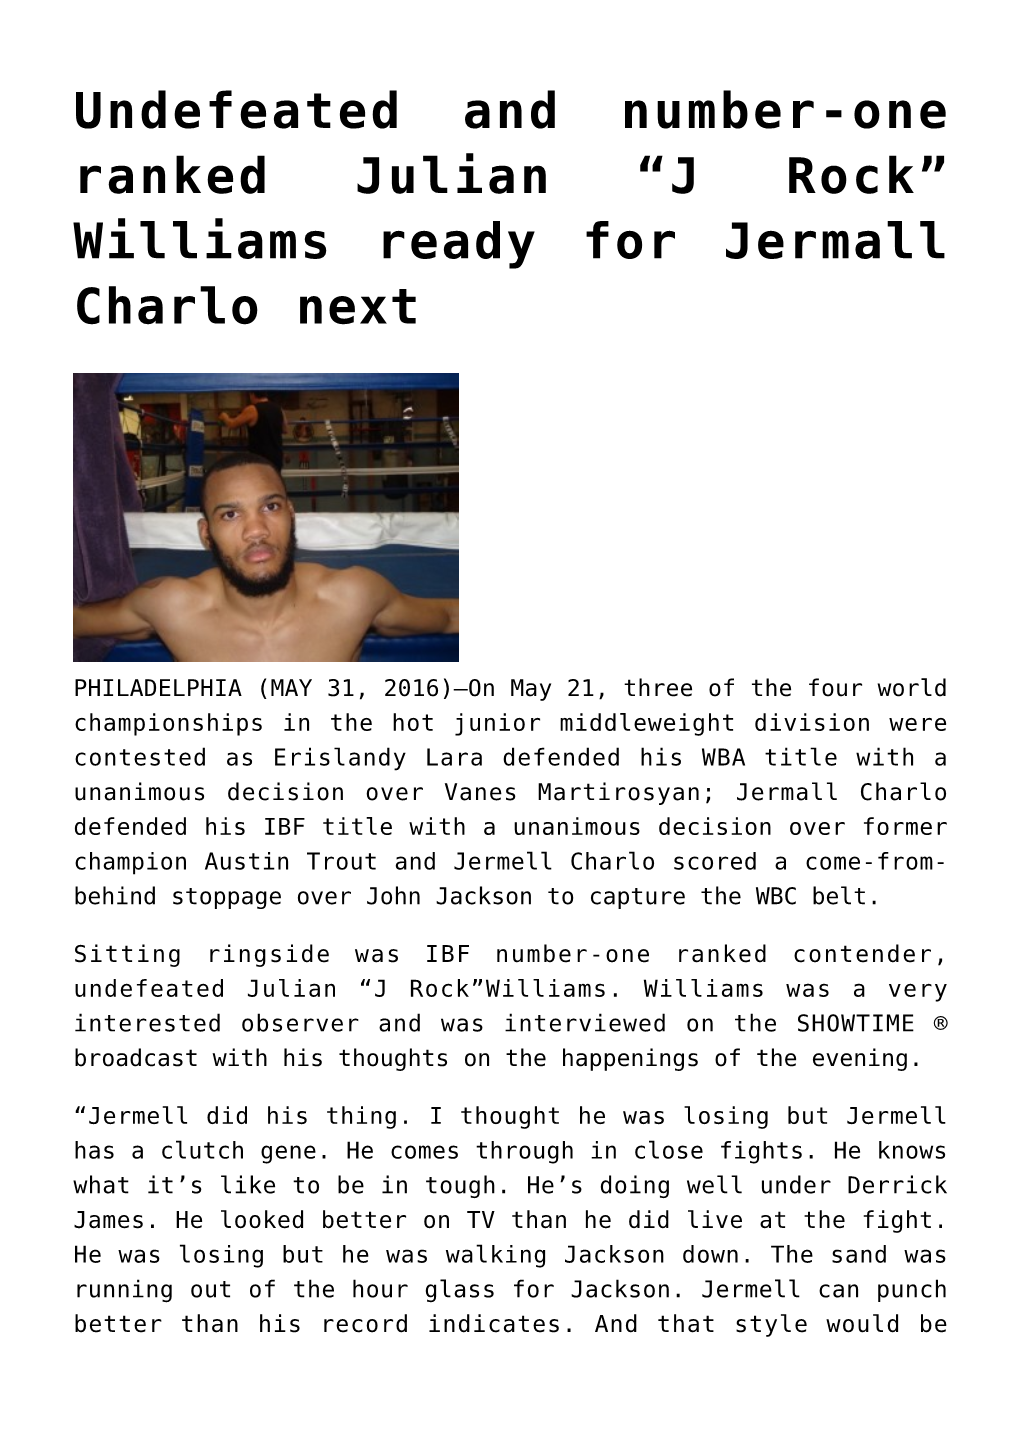 Williams Ready for Jermall Charlo Next